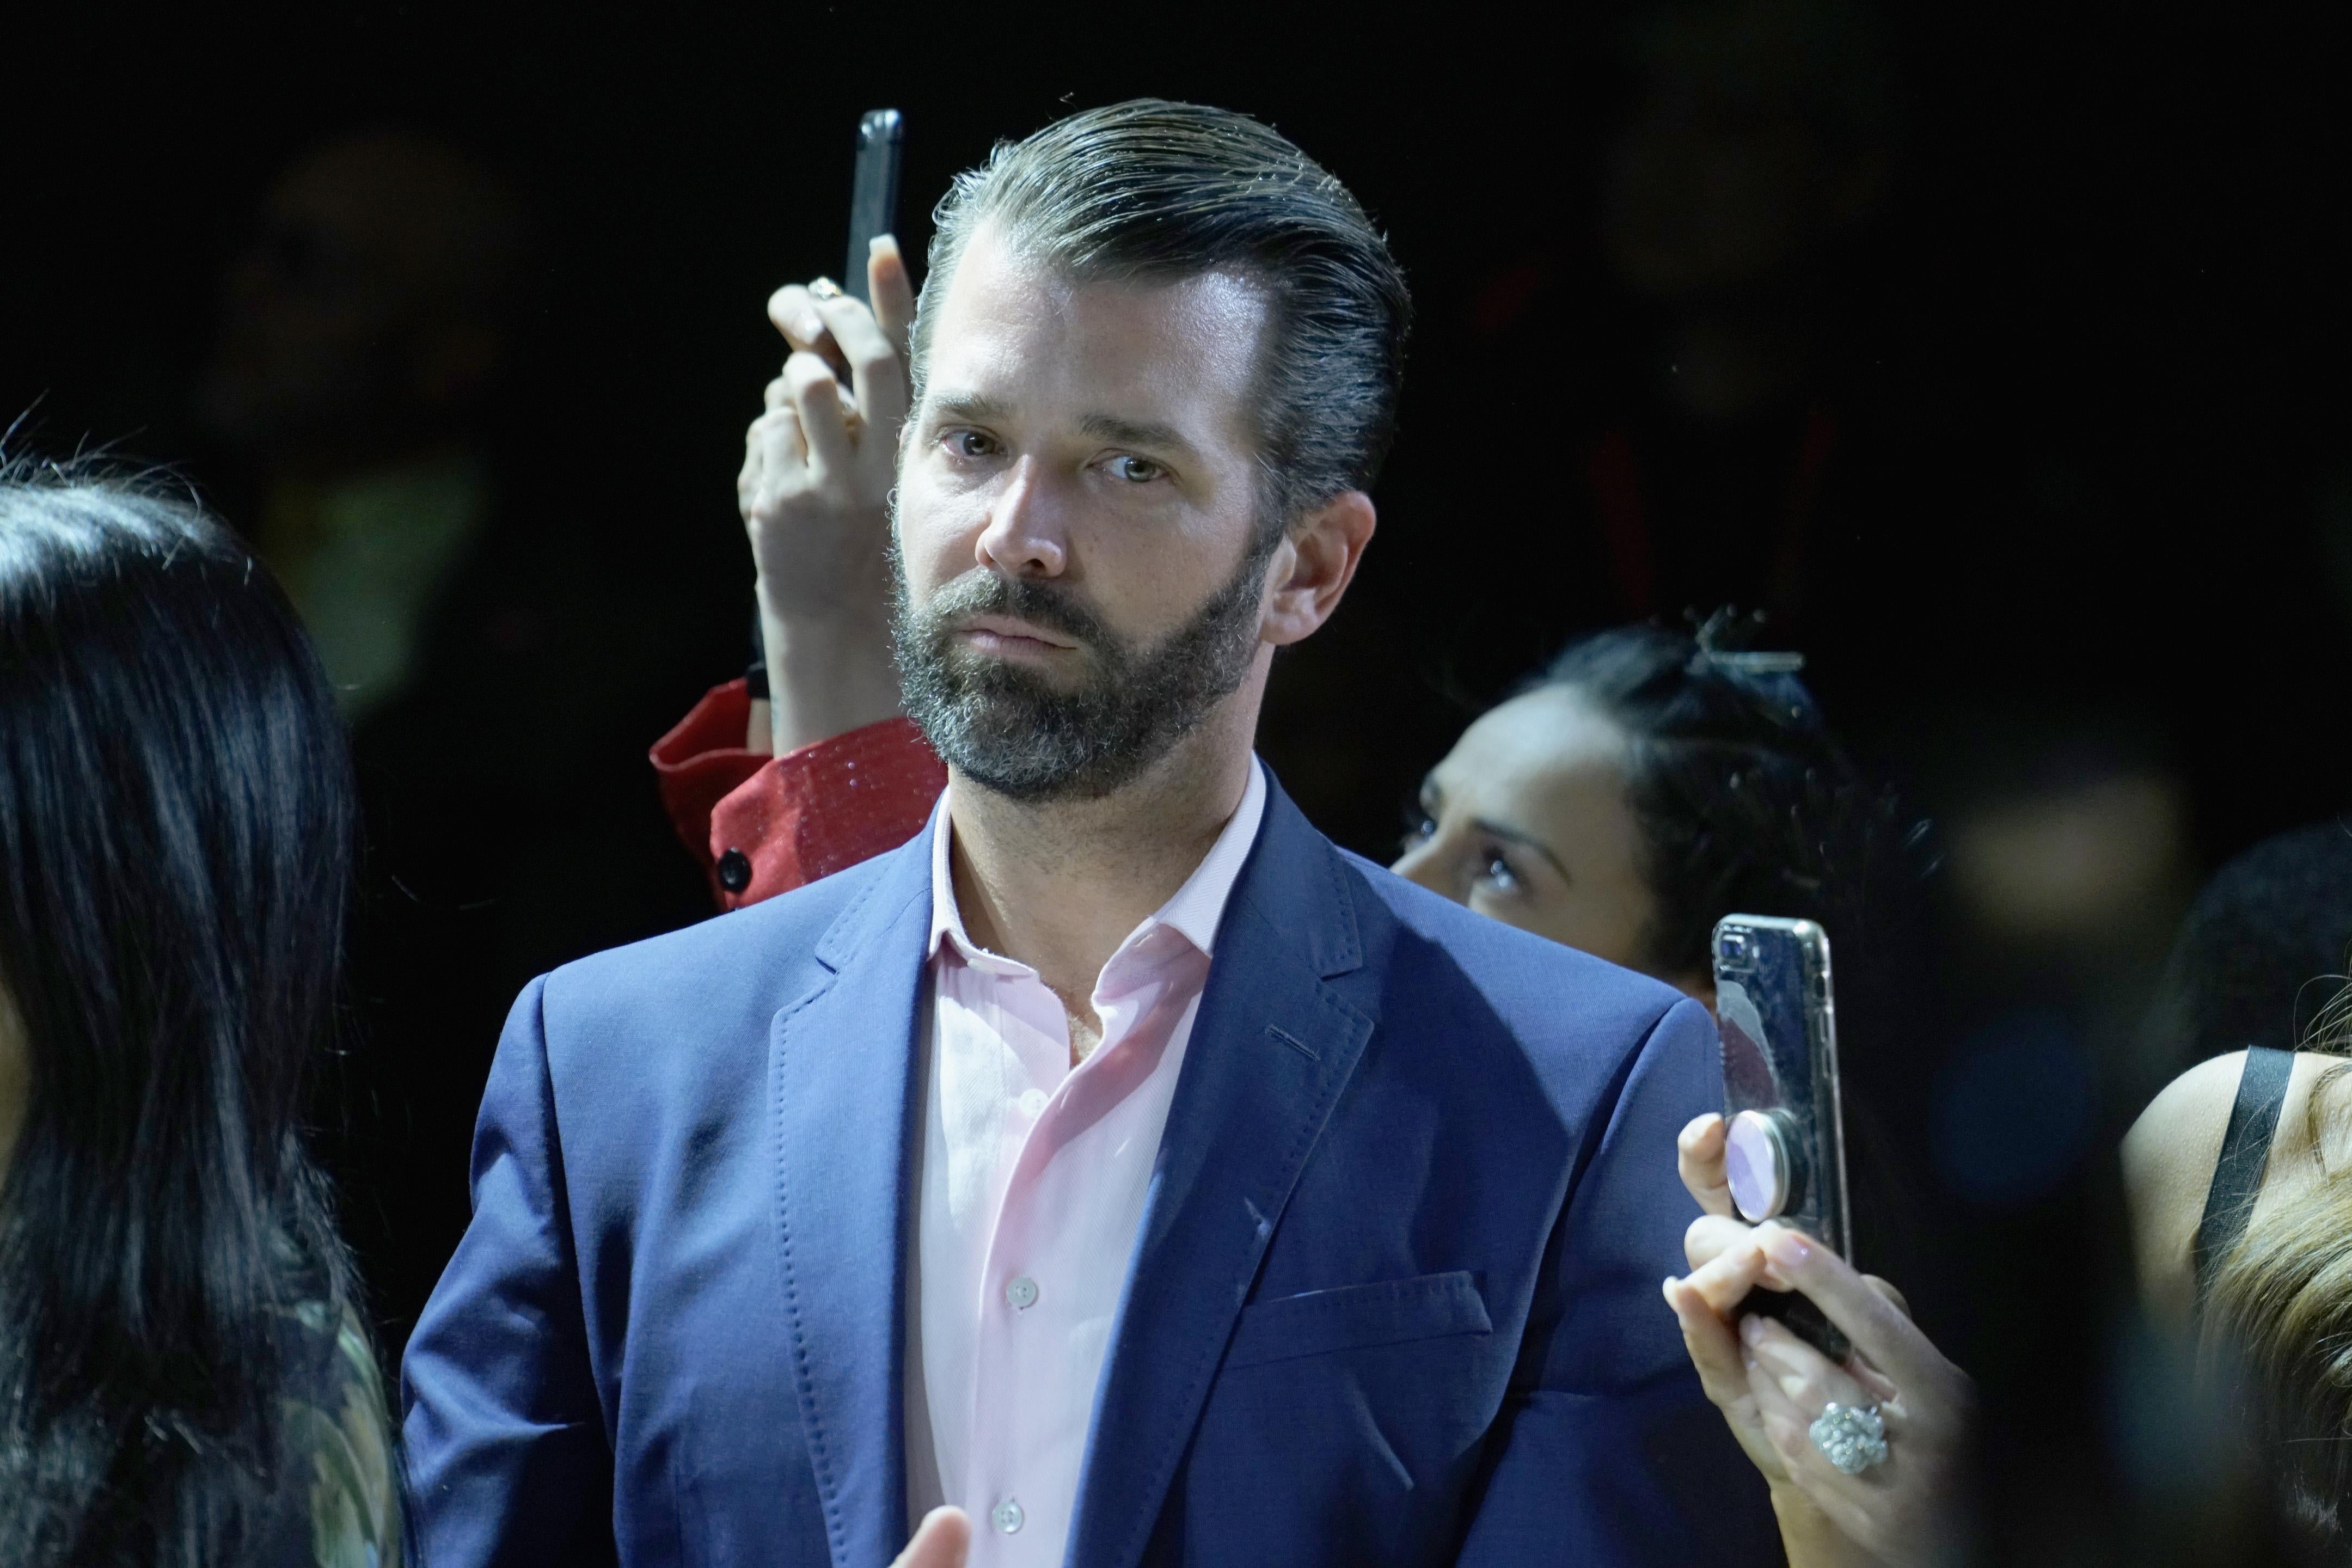 Donald Trump Jr. attends New York Fashion Week: The Shows at Spring Studios on February 13, 2019 in New York City.